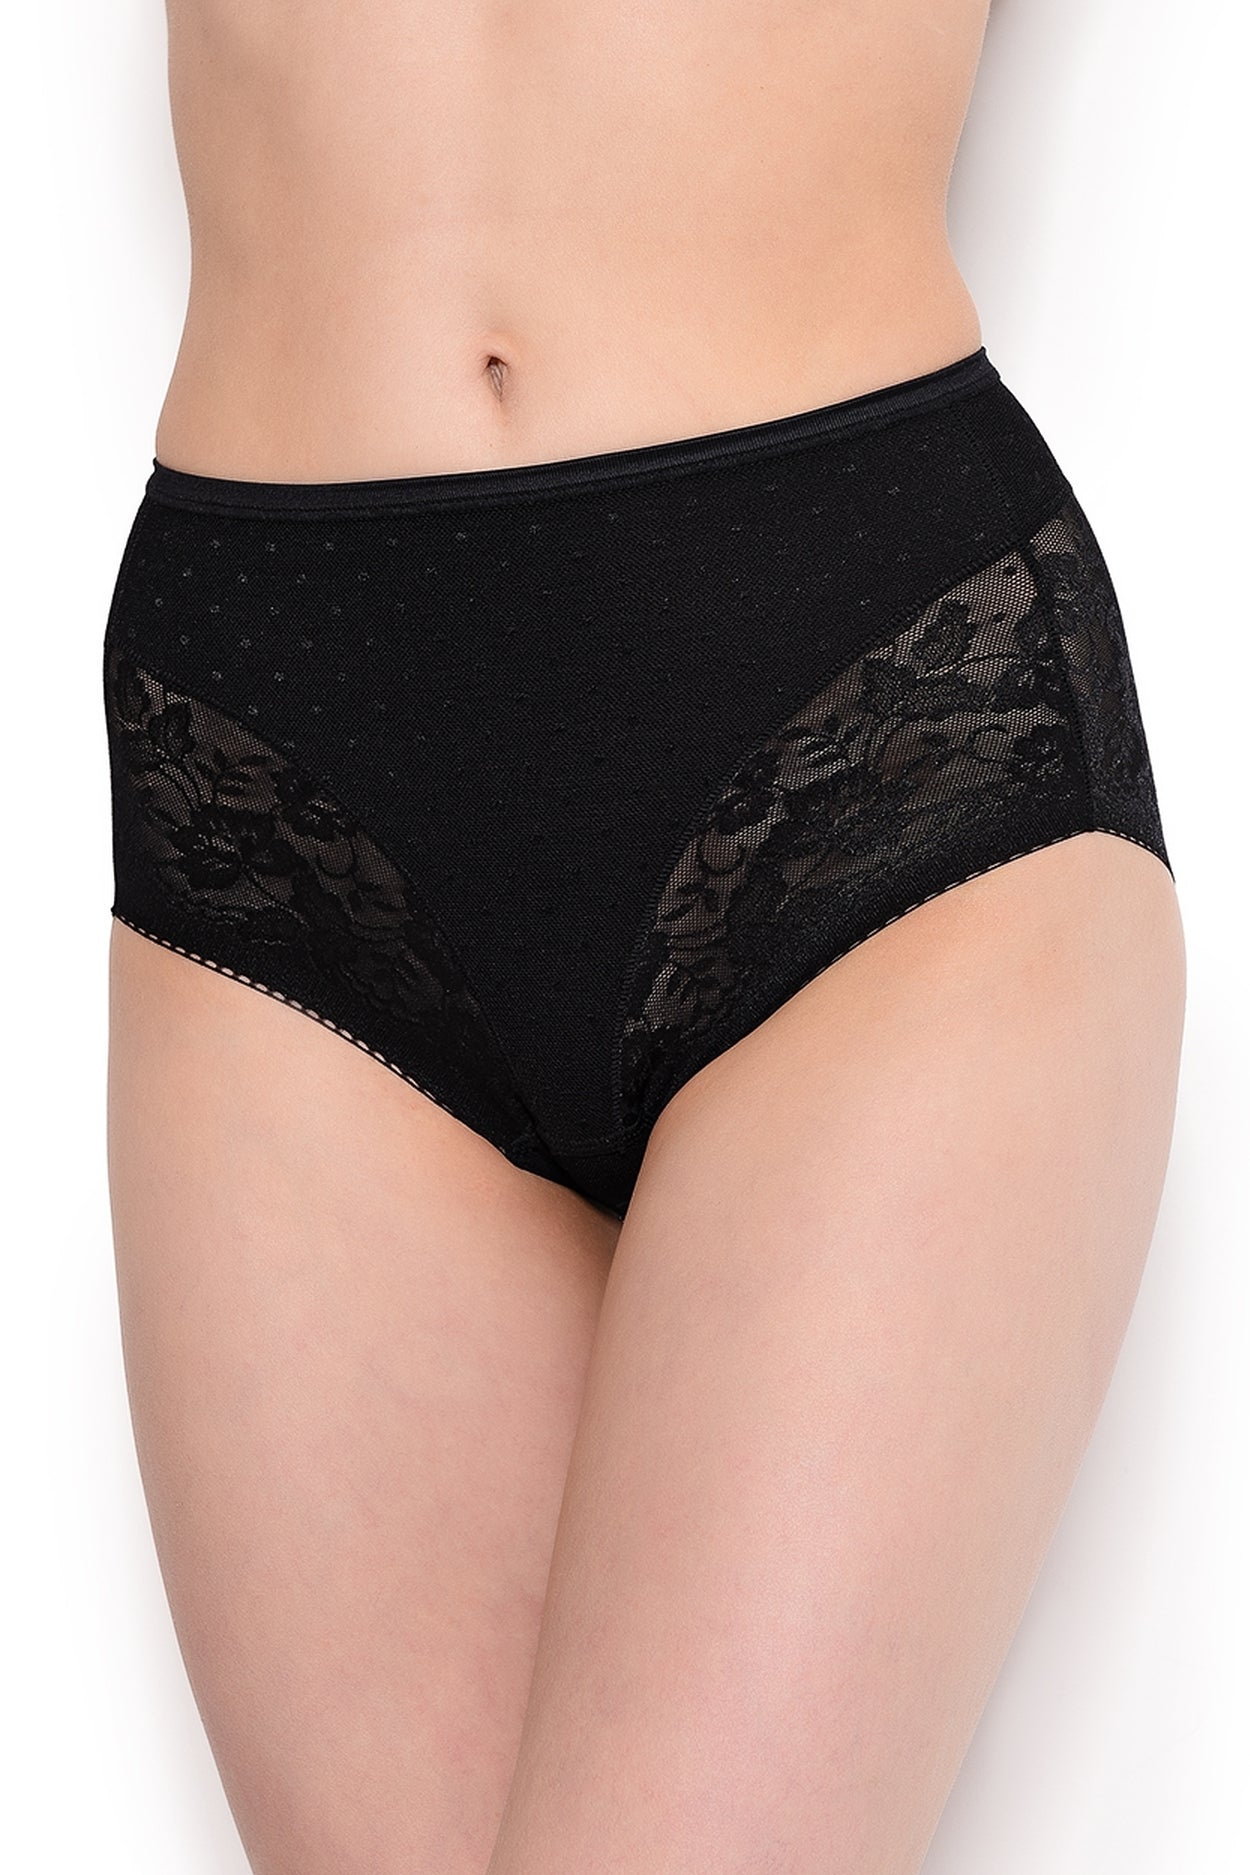 Underwear Tagged low rise - Midnight Magic Lingerie